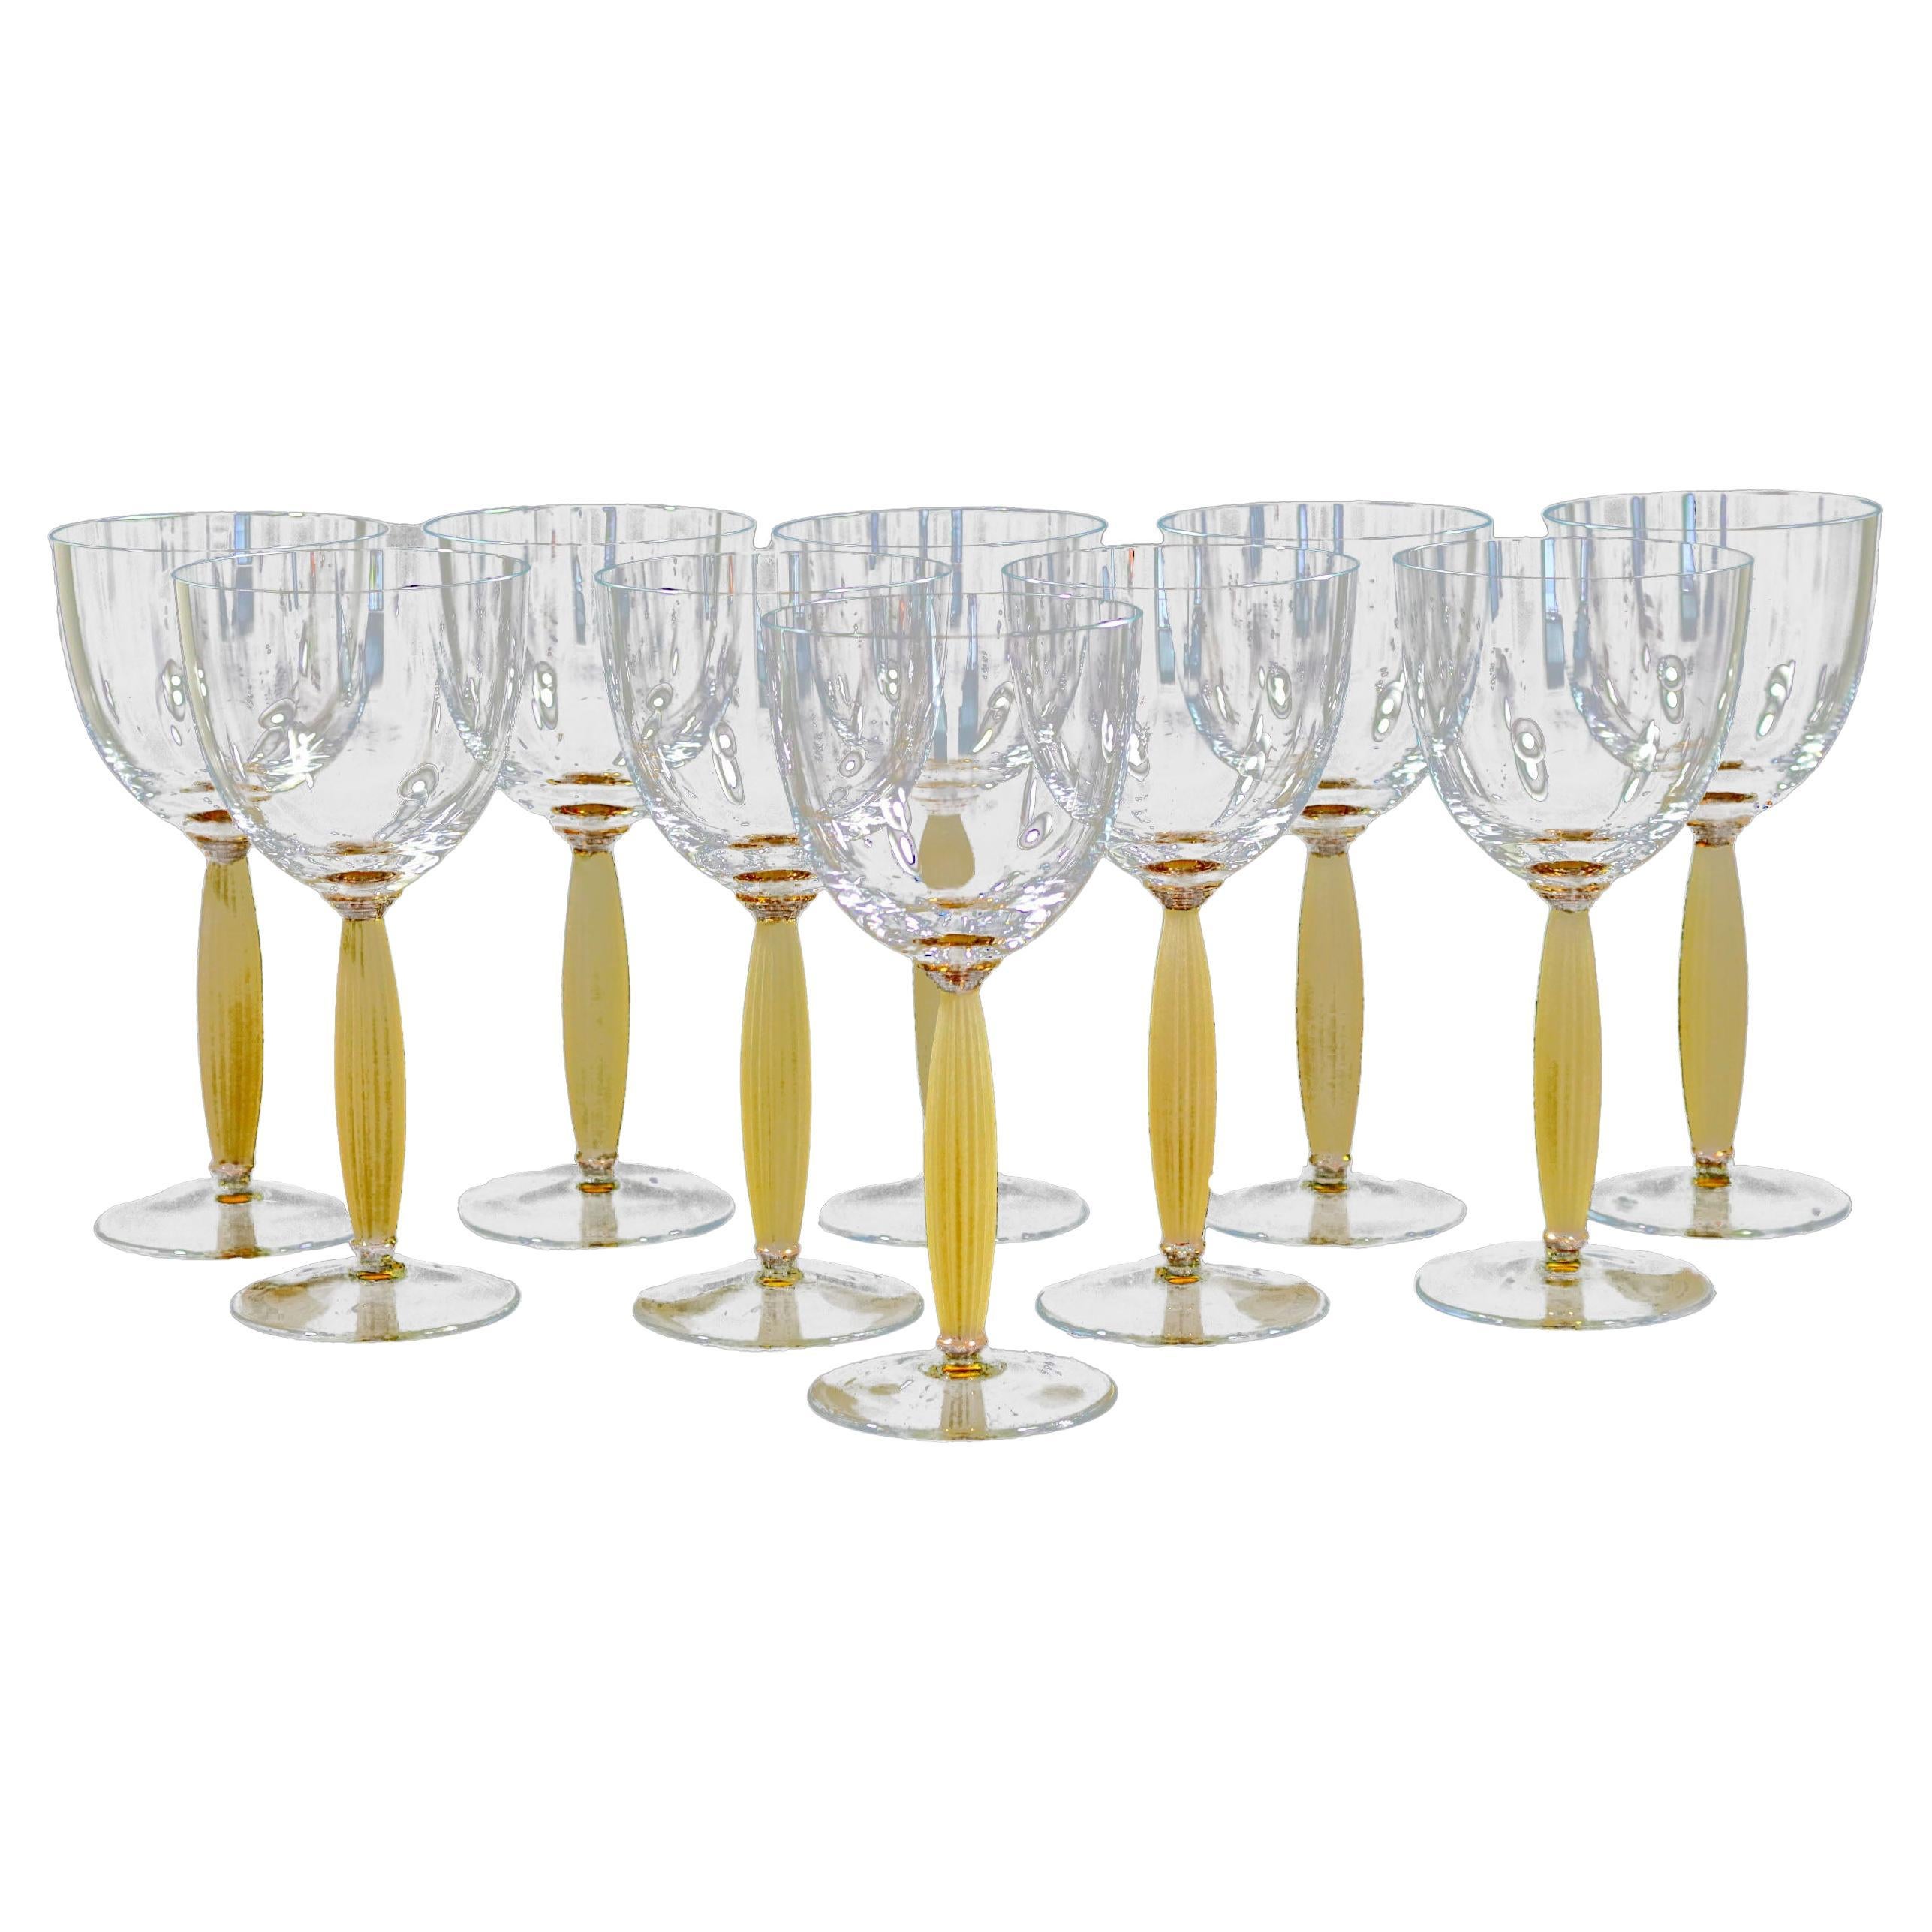 Set of 10 Wine Glasses, Mid 20th Century For Sale